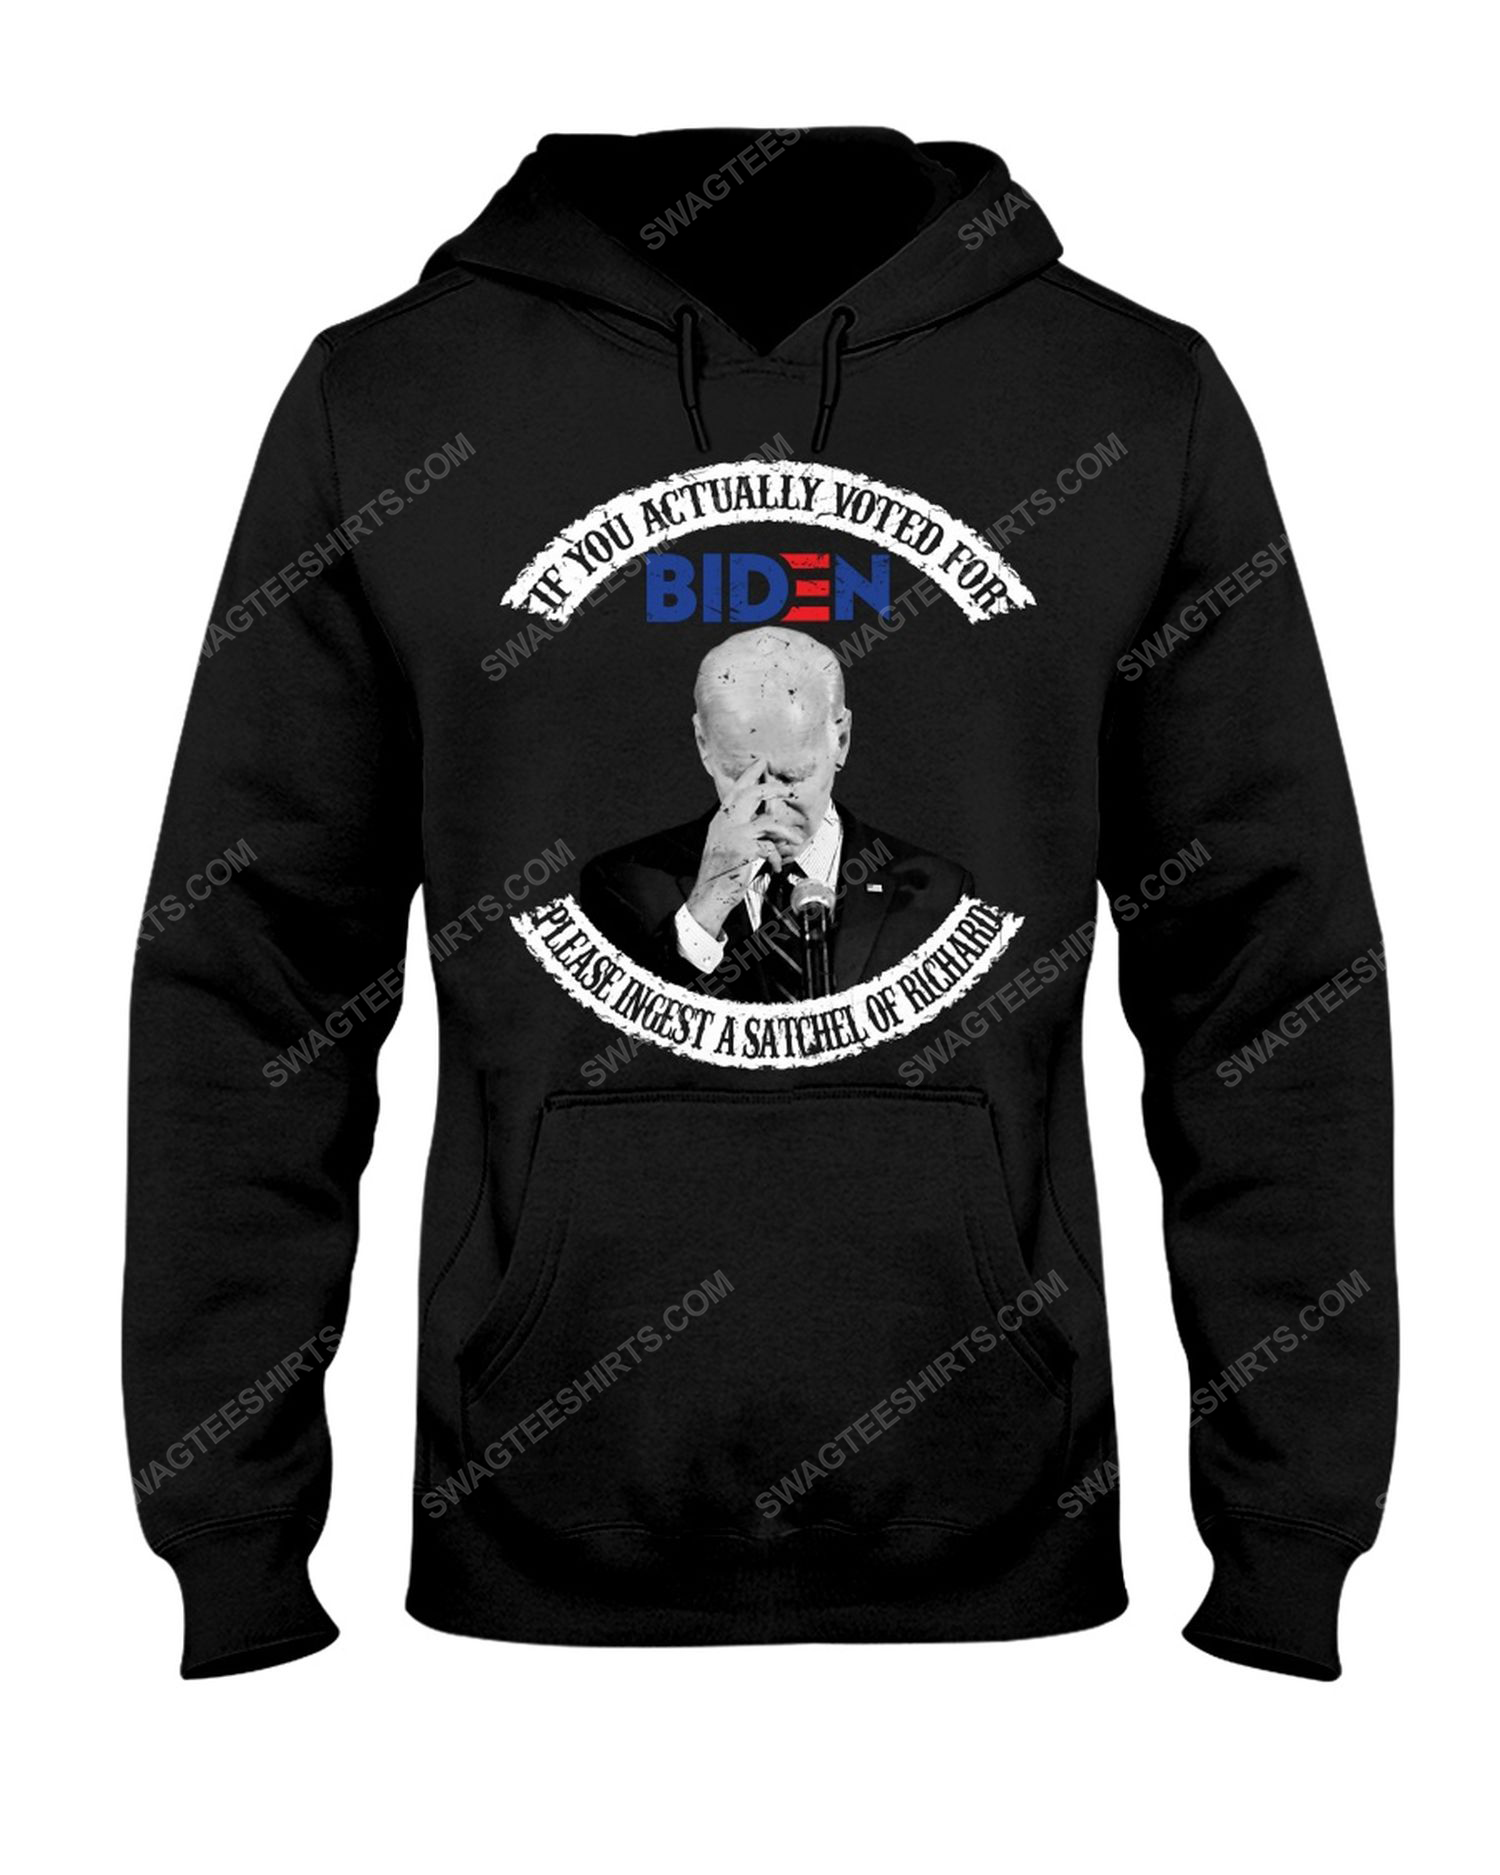 If you actually voted for biden please ingest a satchel of richards political hoodie